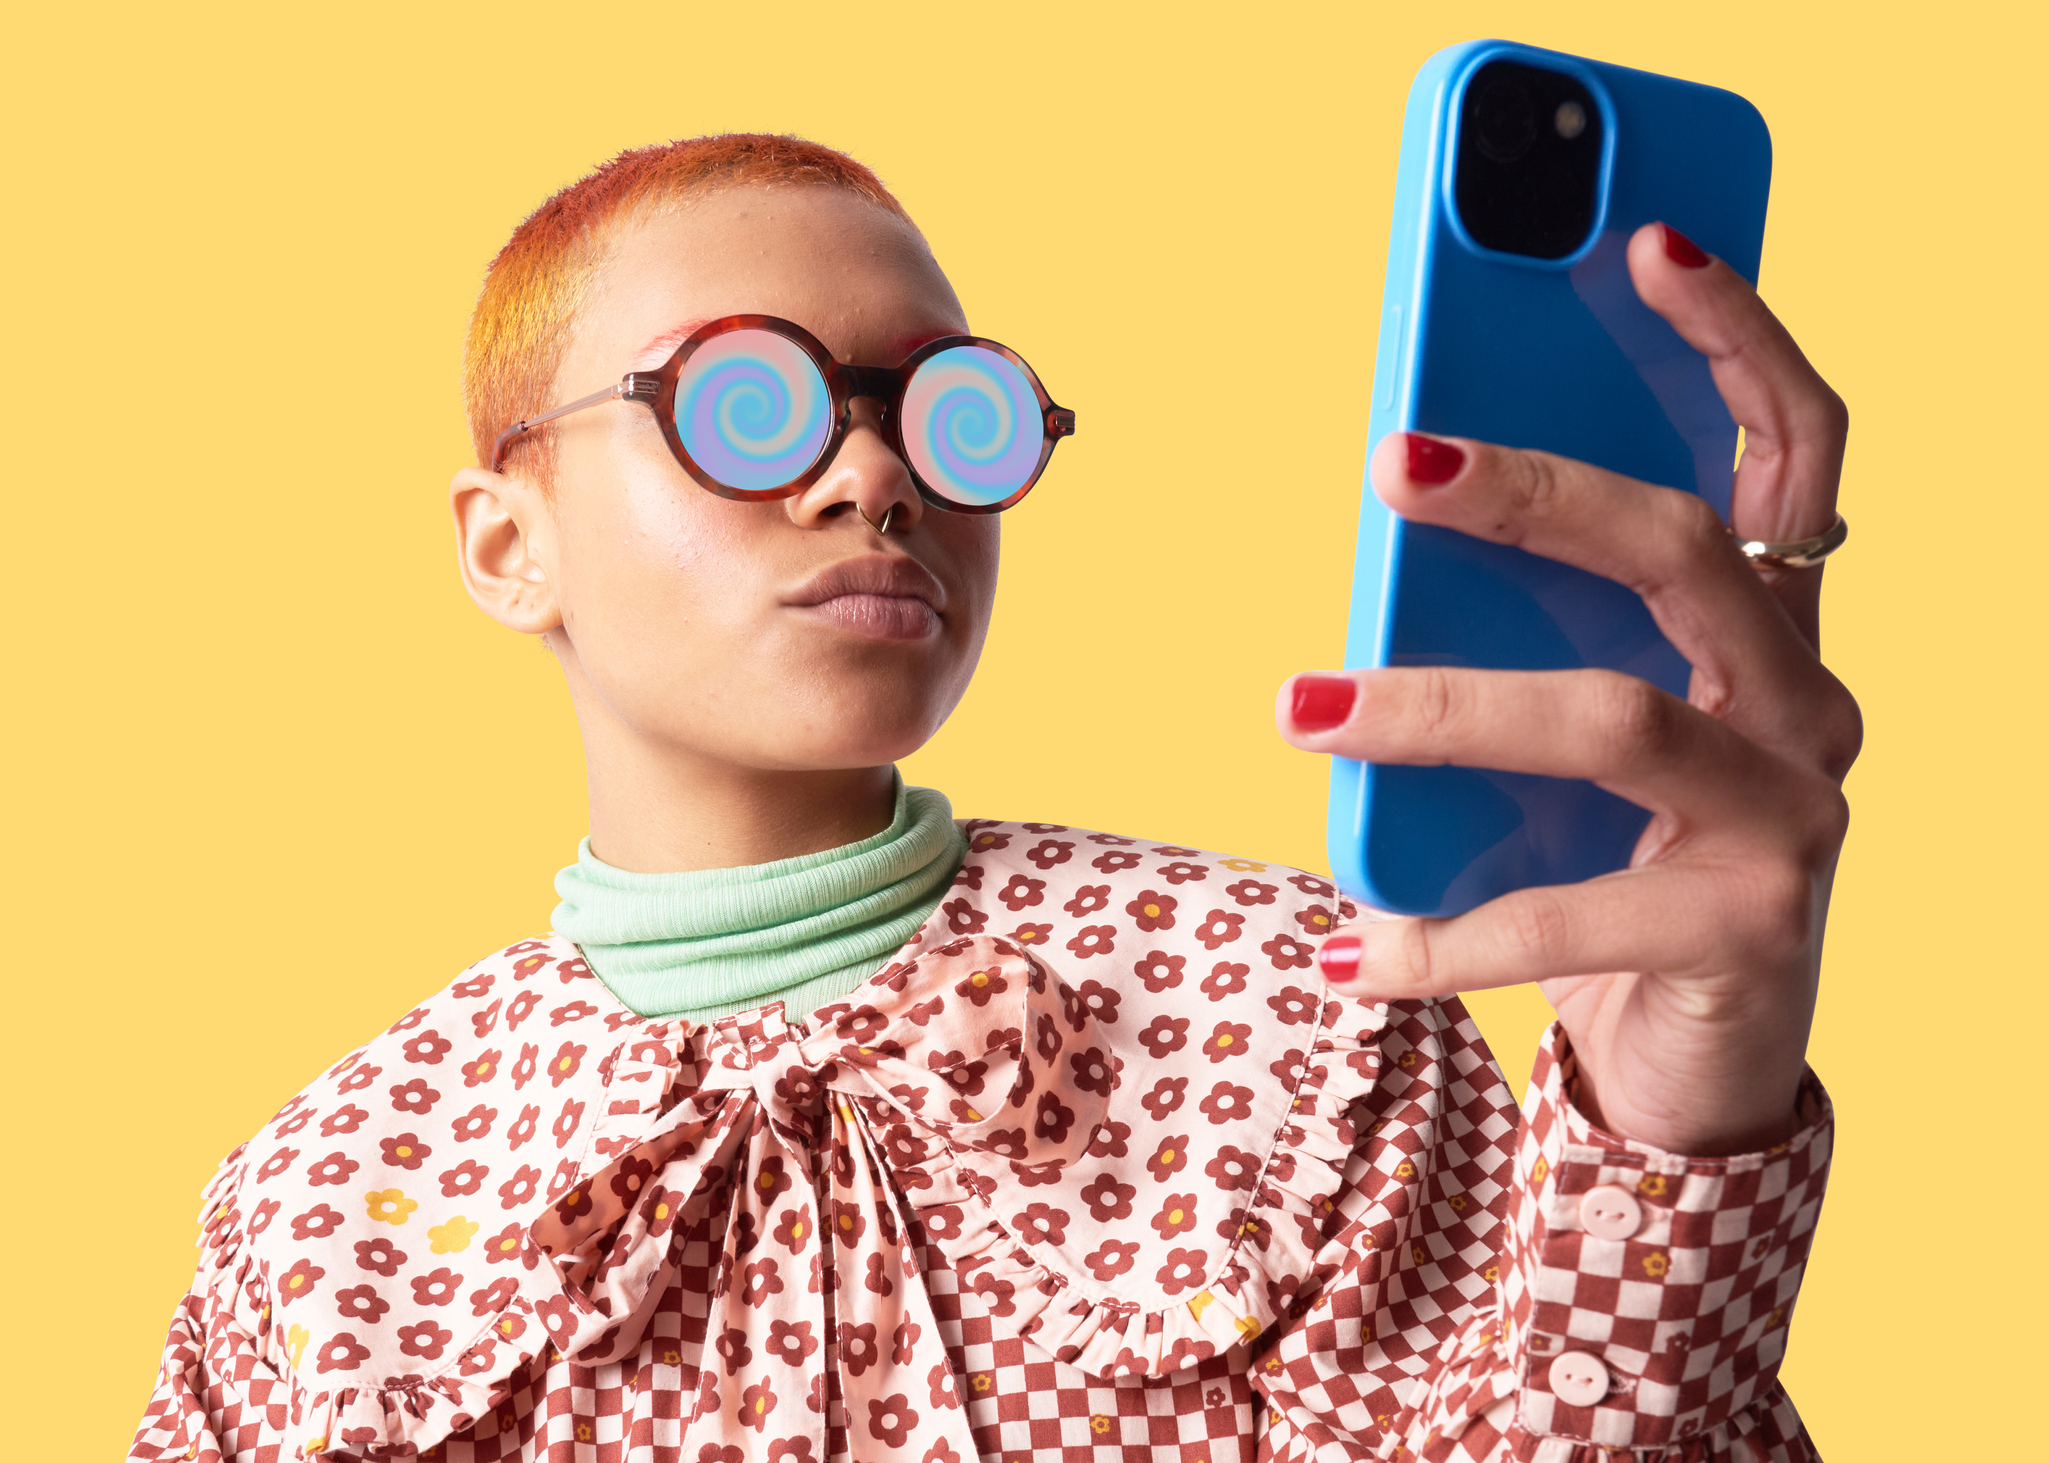 4 ways emerging brands can resonate with Gen Z consumers